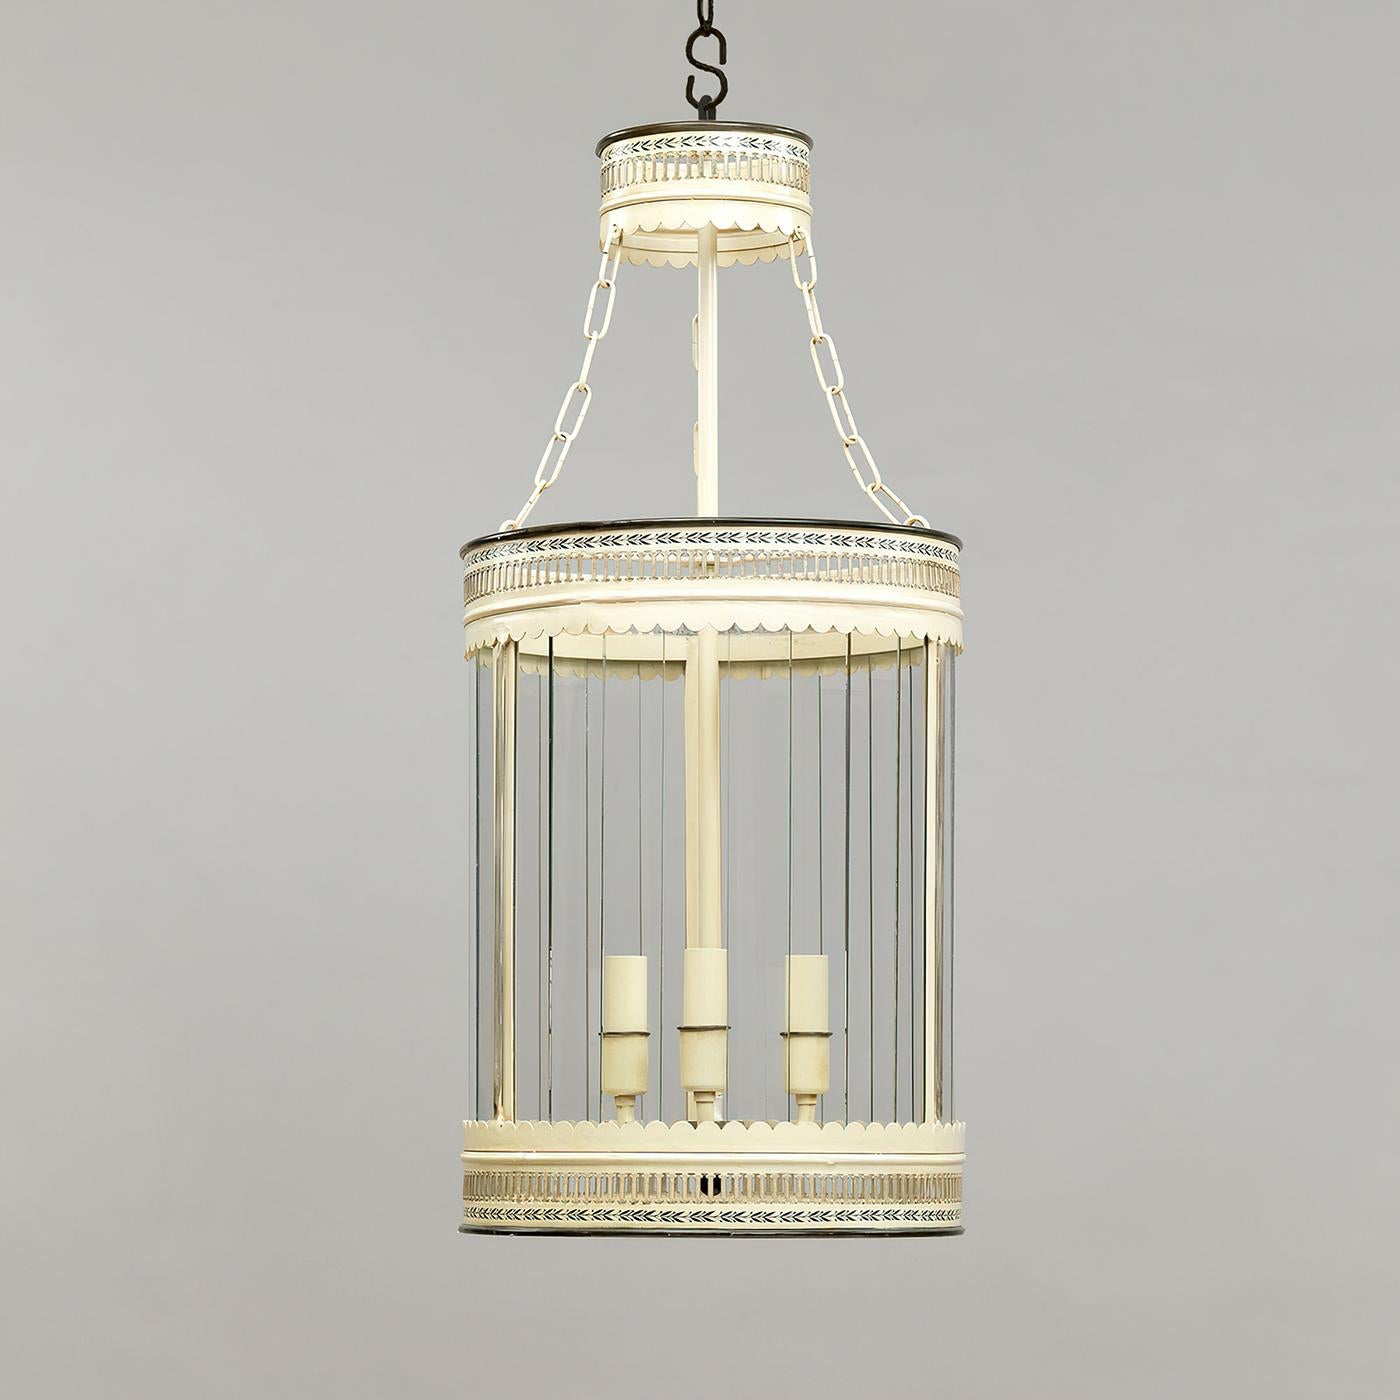 French Ivory lantern, based on a French design, the delicate hand-painted decoration on the slatted glass adds texture. The motif on the coronet is reflected in the decoration on the central body. The three-light lantern has a hand-painted steel